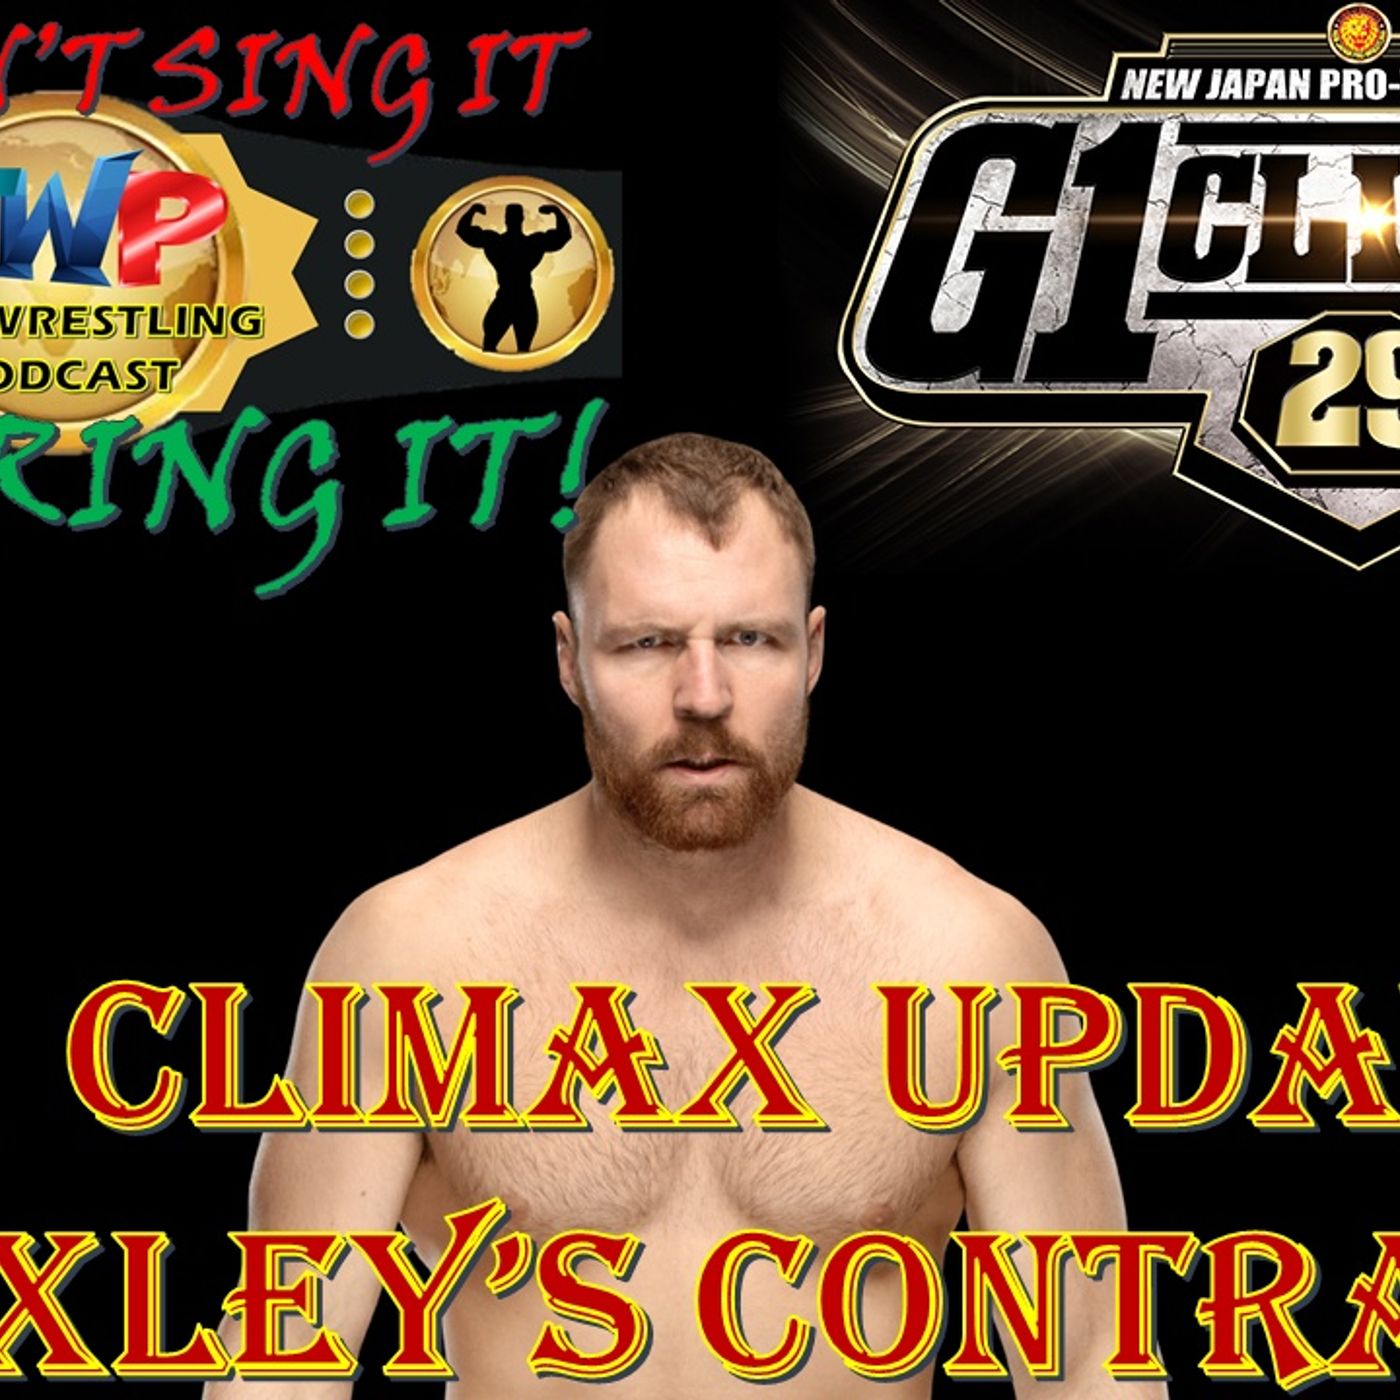 G1 Climax Update - Jon Moxley’s Contract